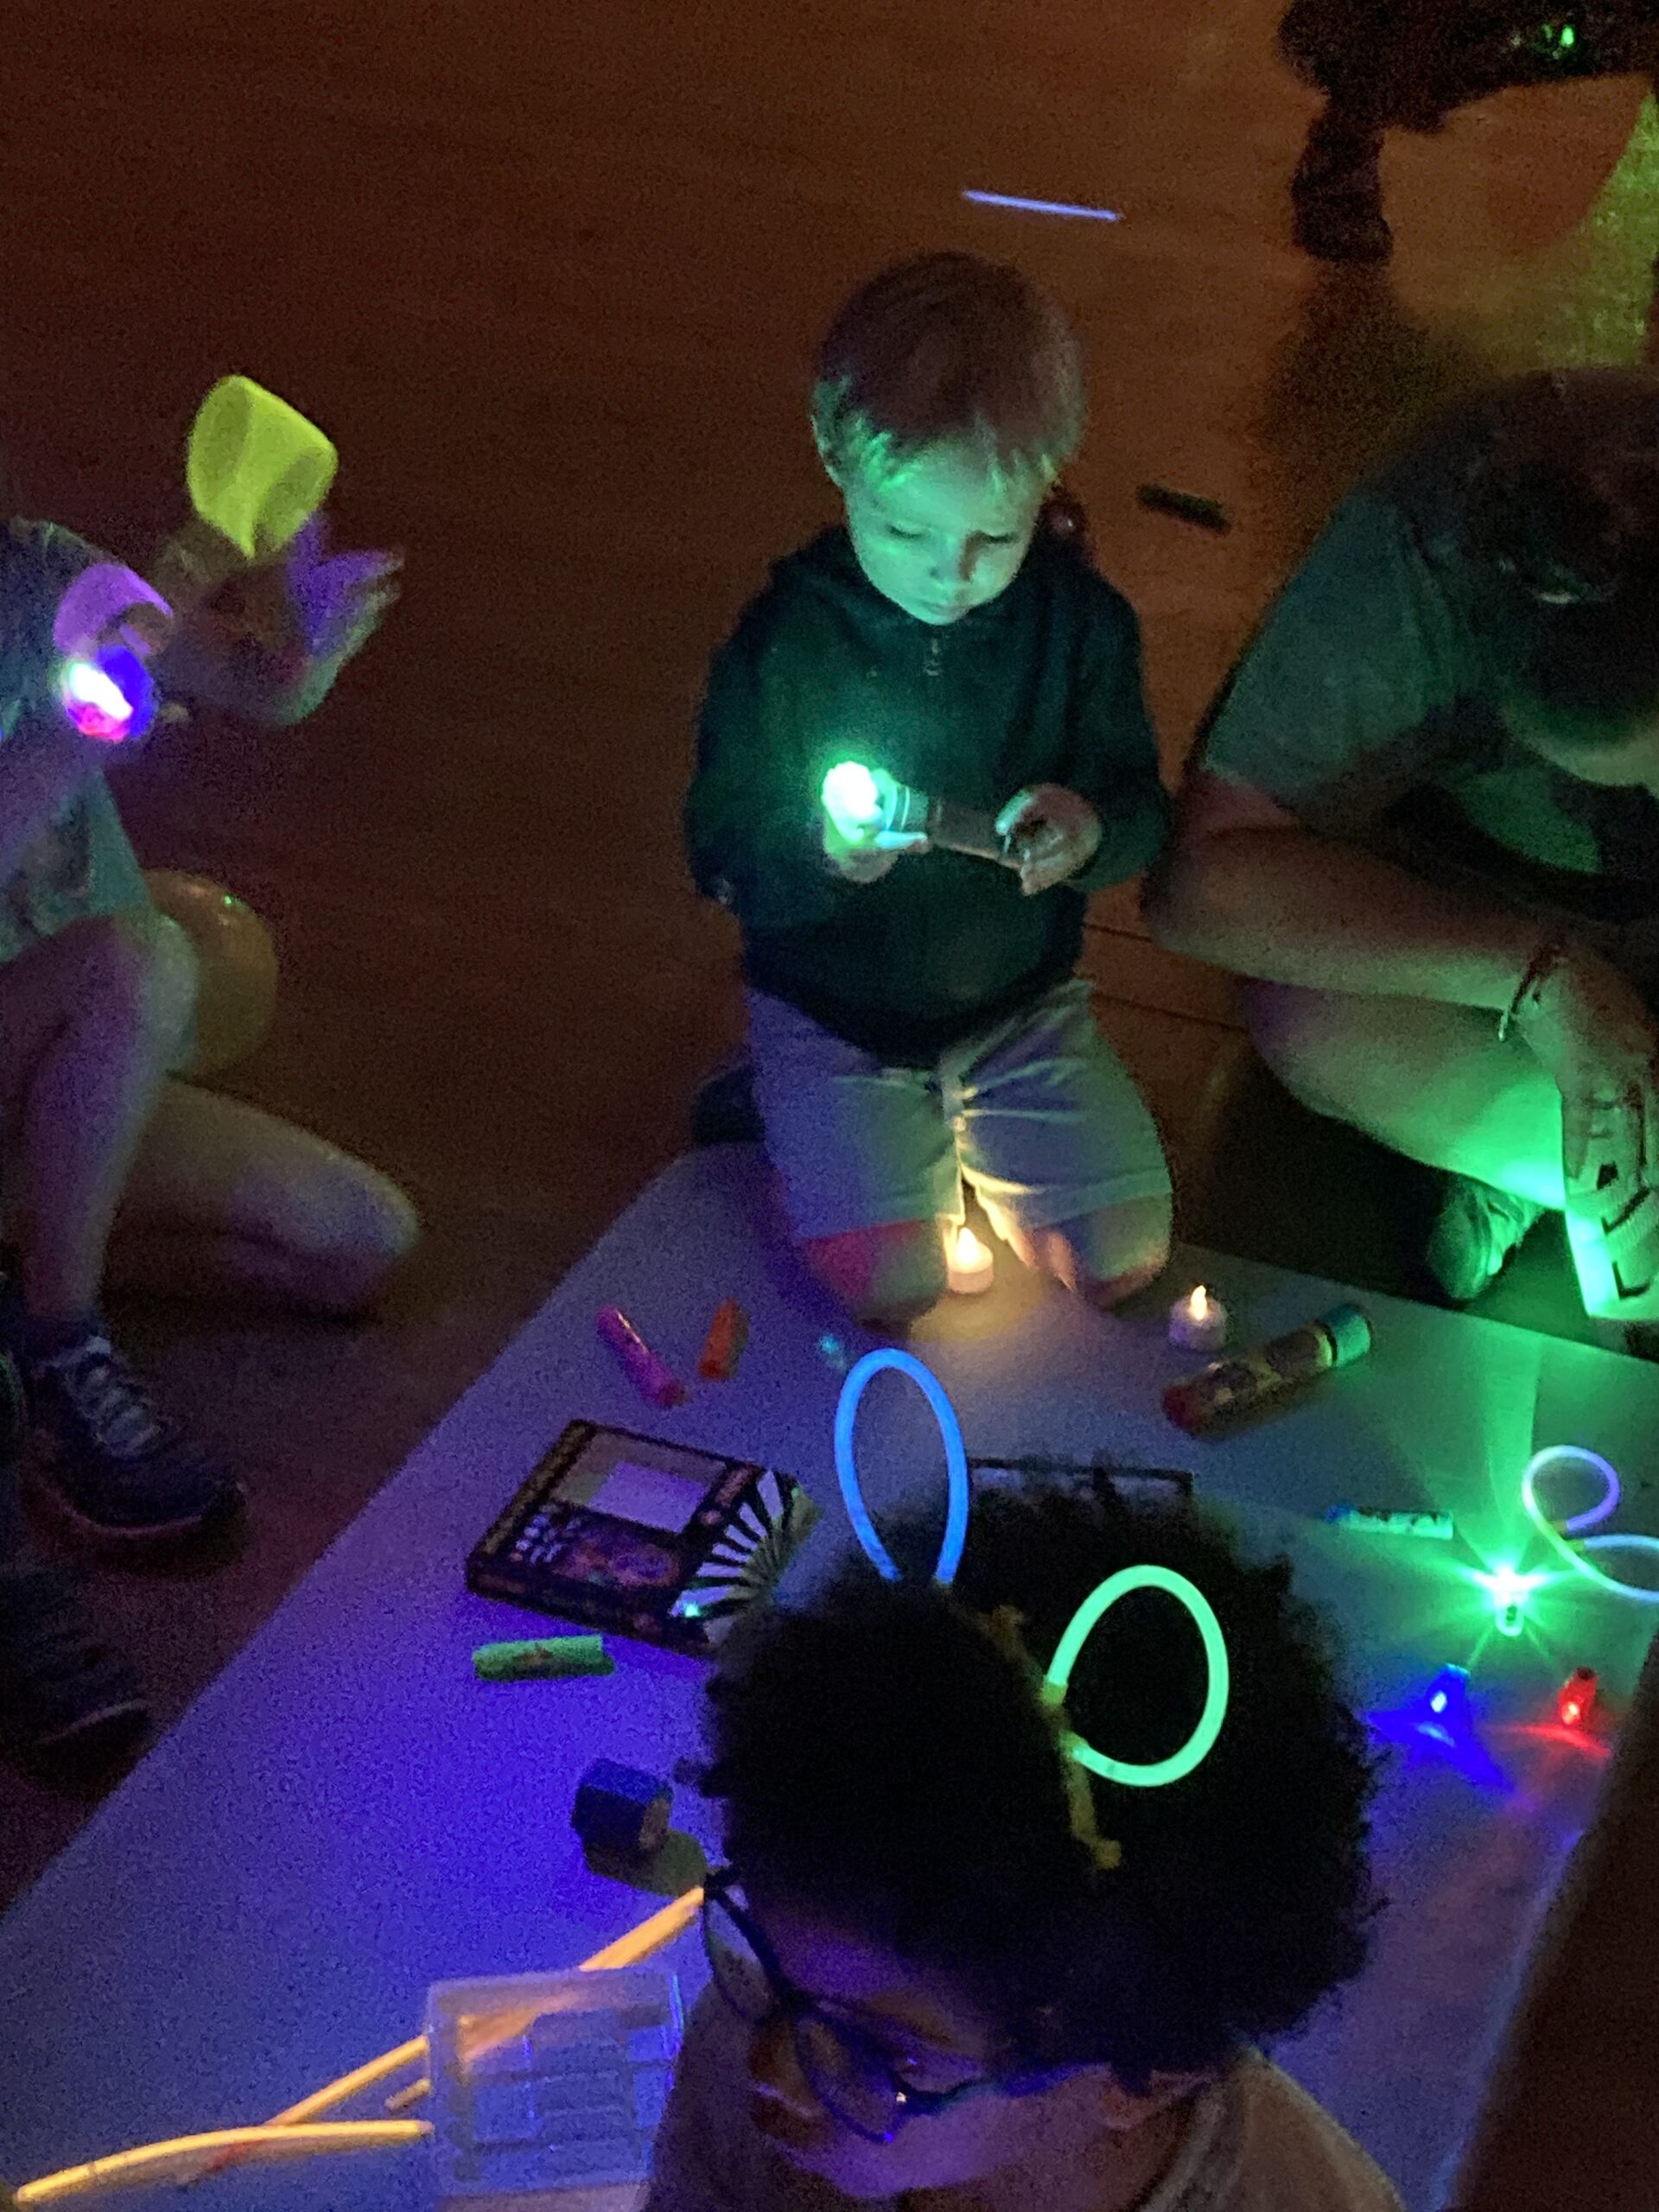 Young boy experimenting with glow in the dark objects in a dark room.